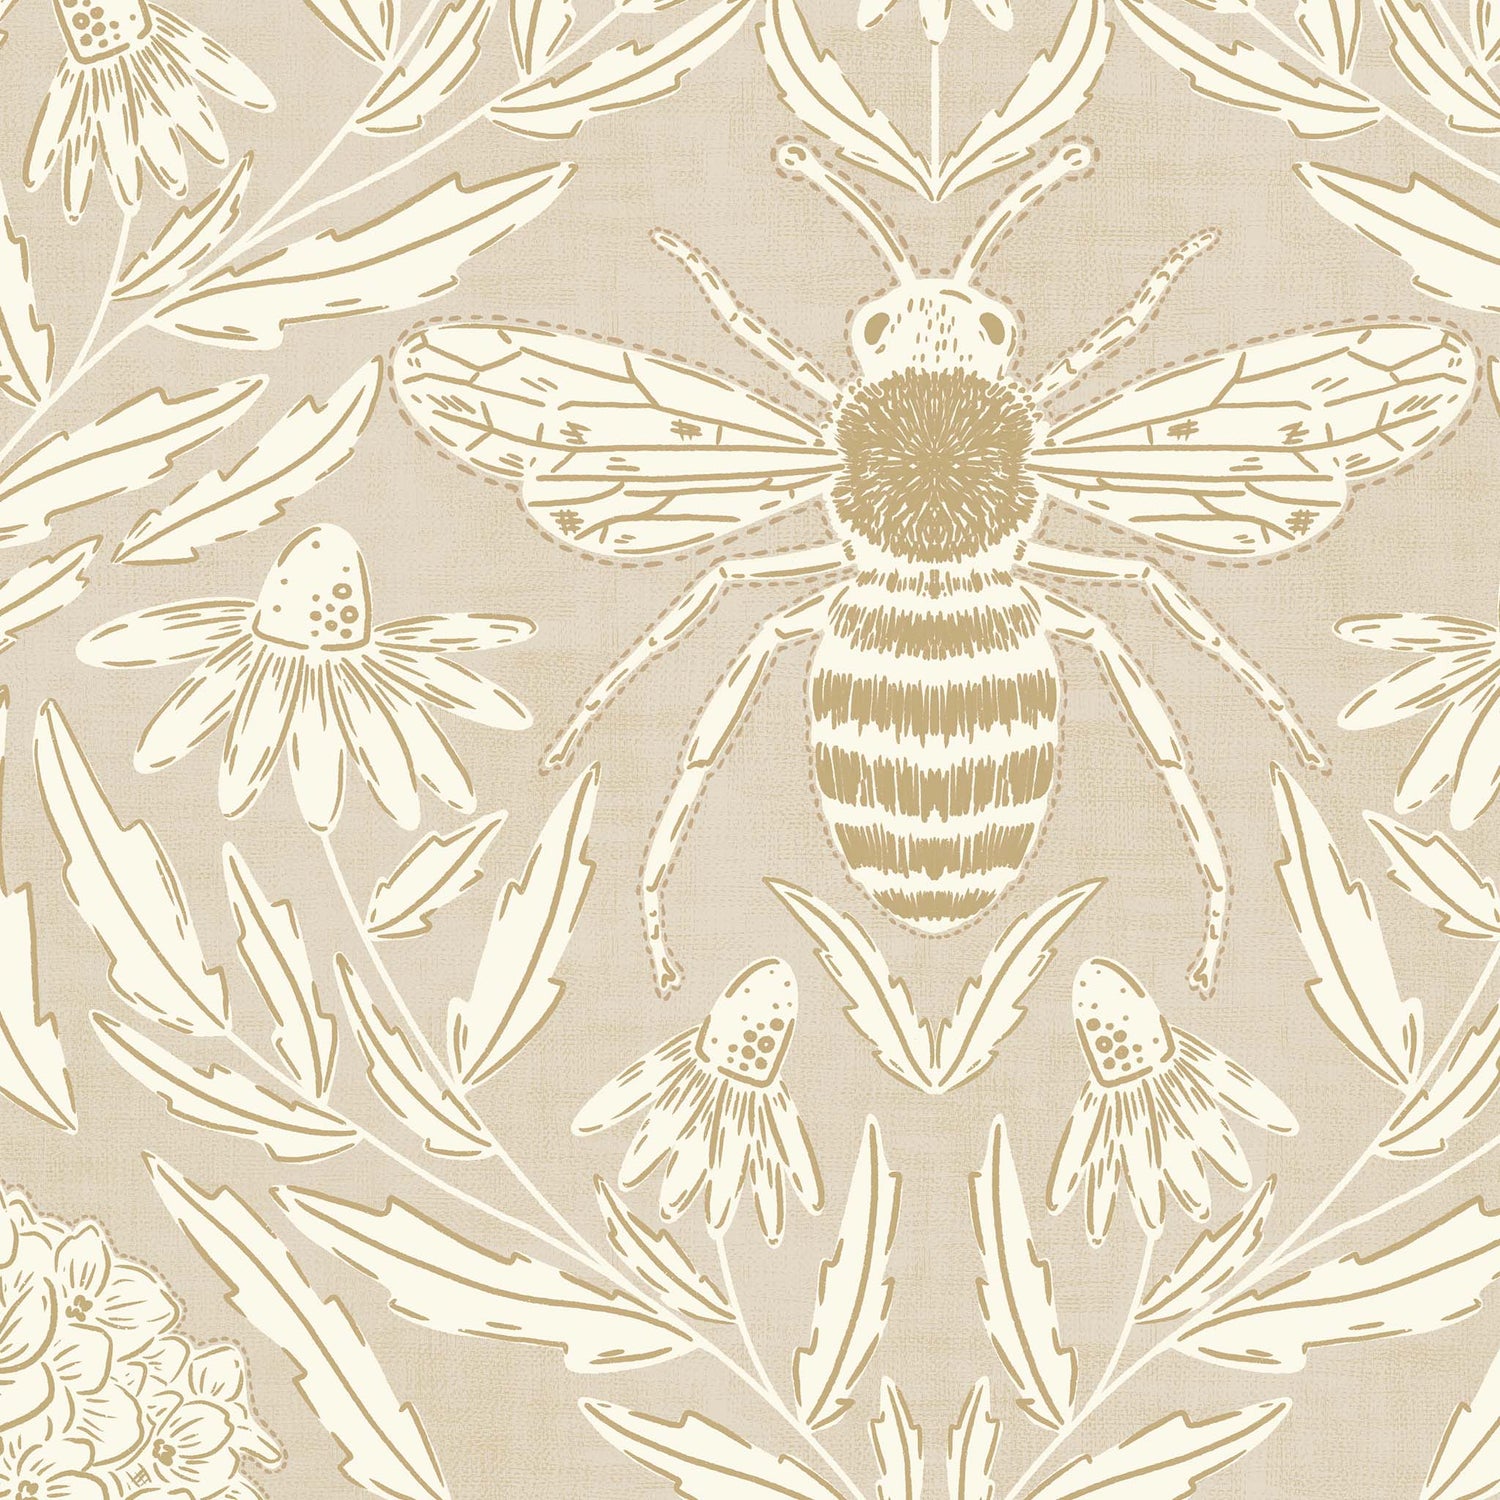 Featuring a stunning classic design of florals and bees, this wallpaper will bring a sense of luxury and sophistication shown zoomed in.